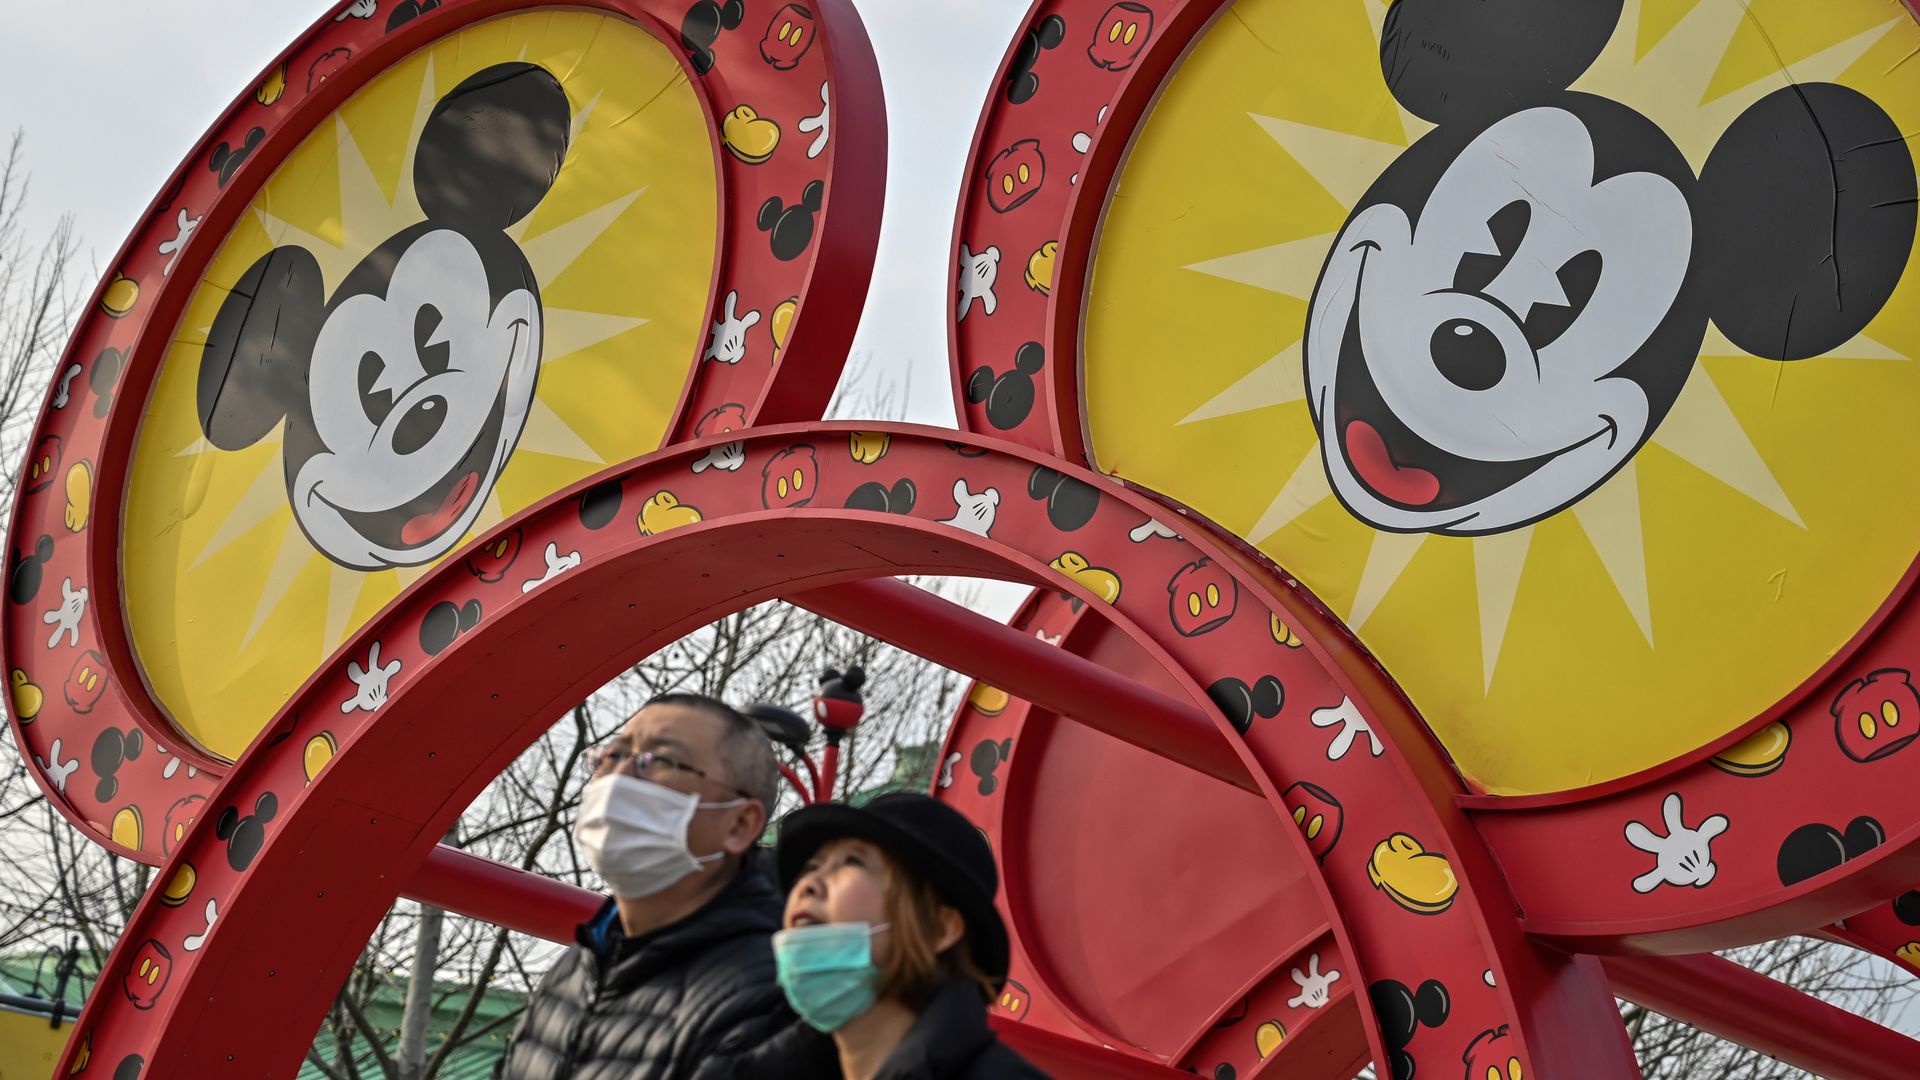 In this image, two people wearing face masks stand underneath a giant Mickey Mouse